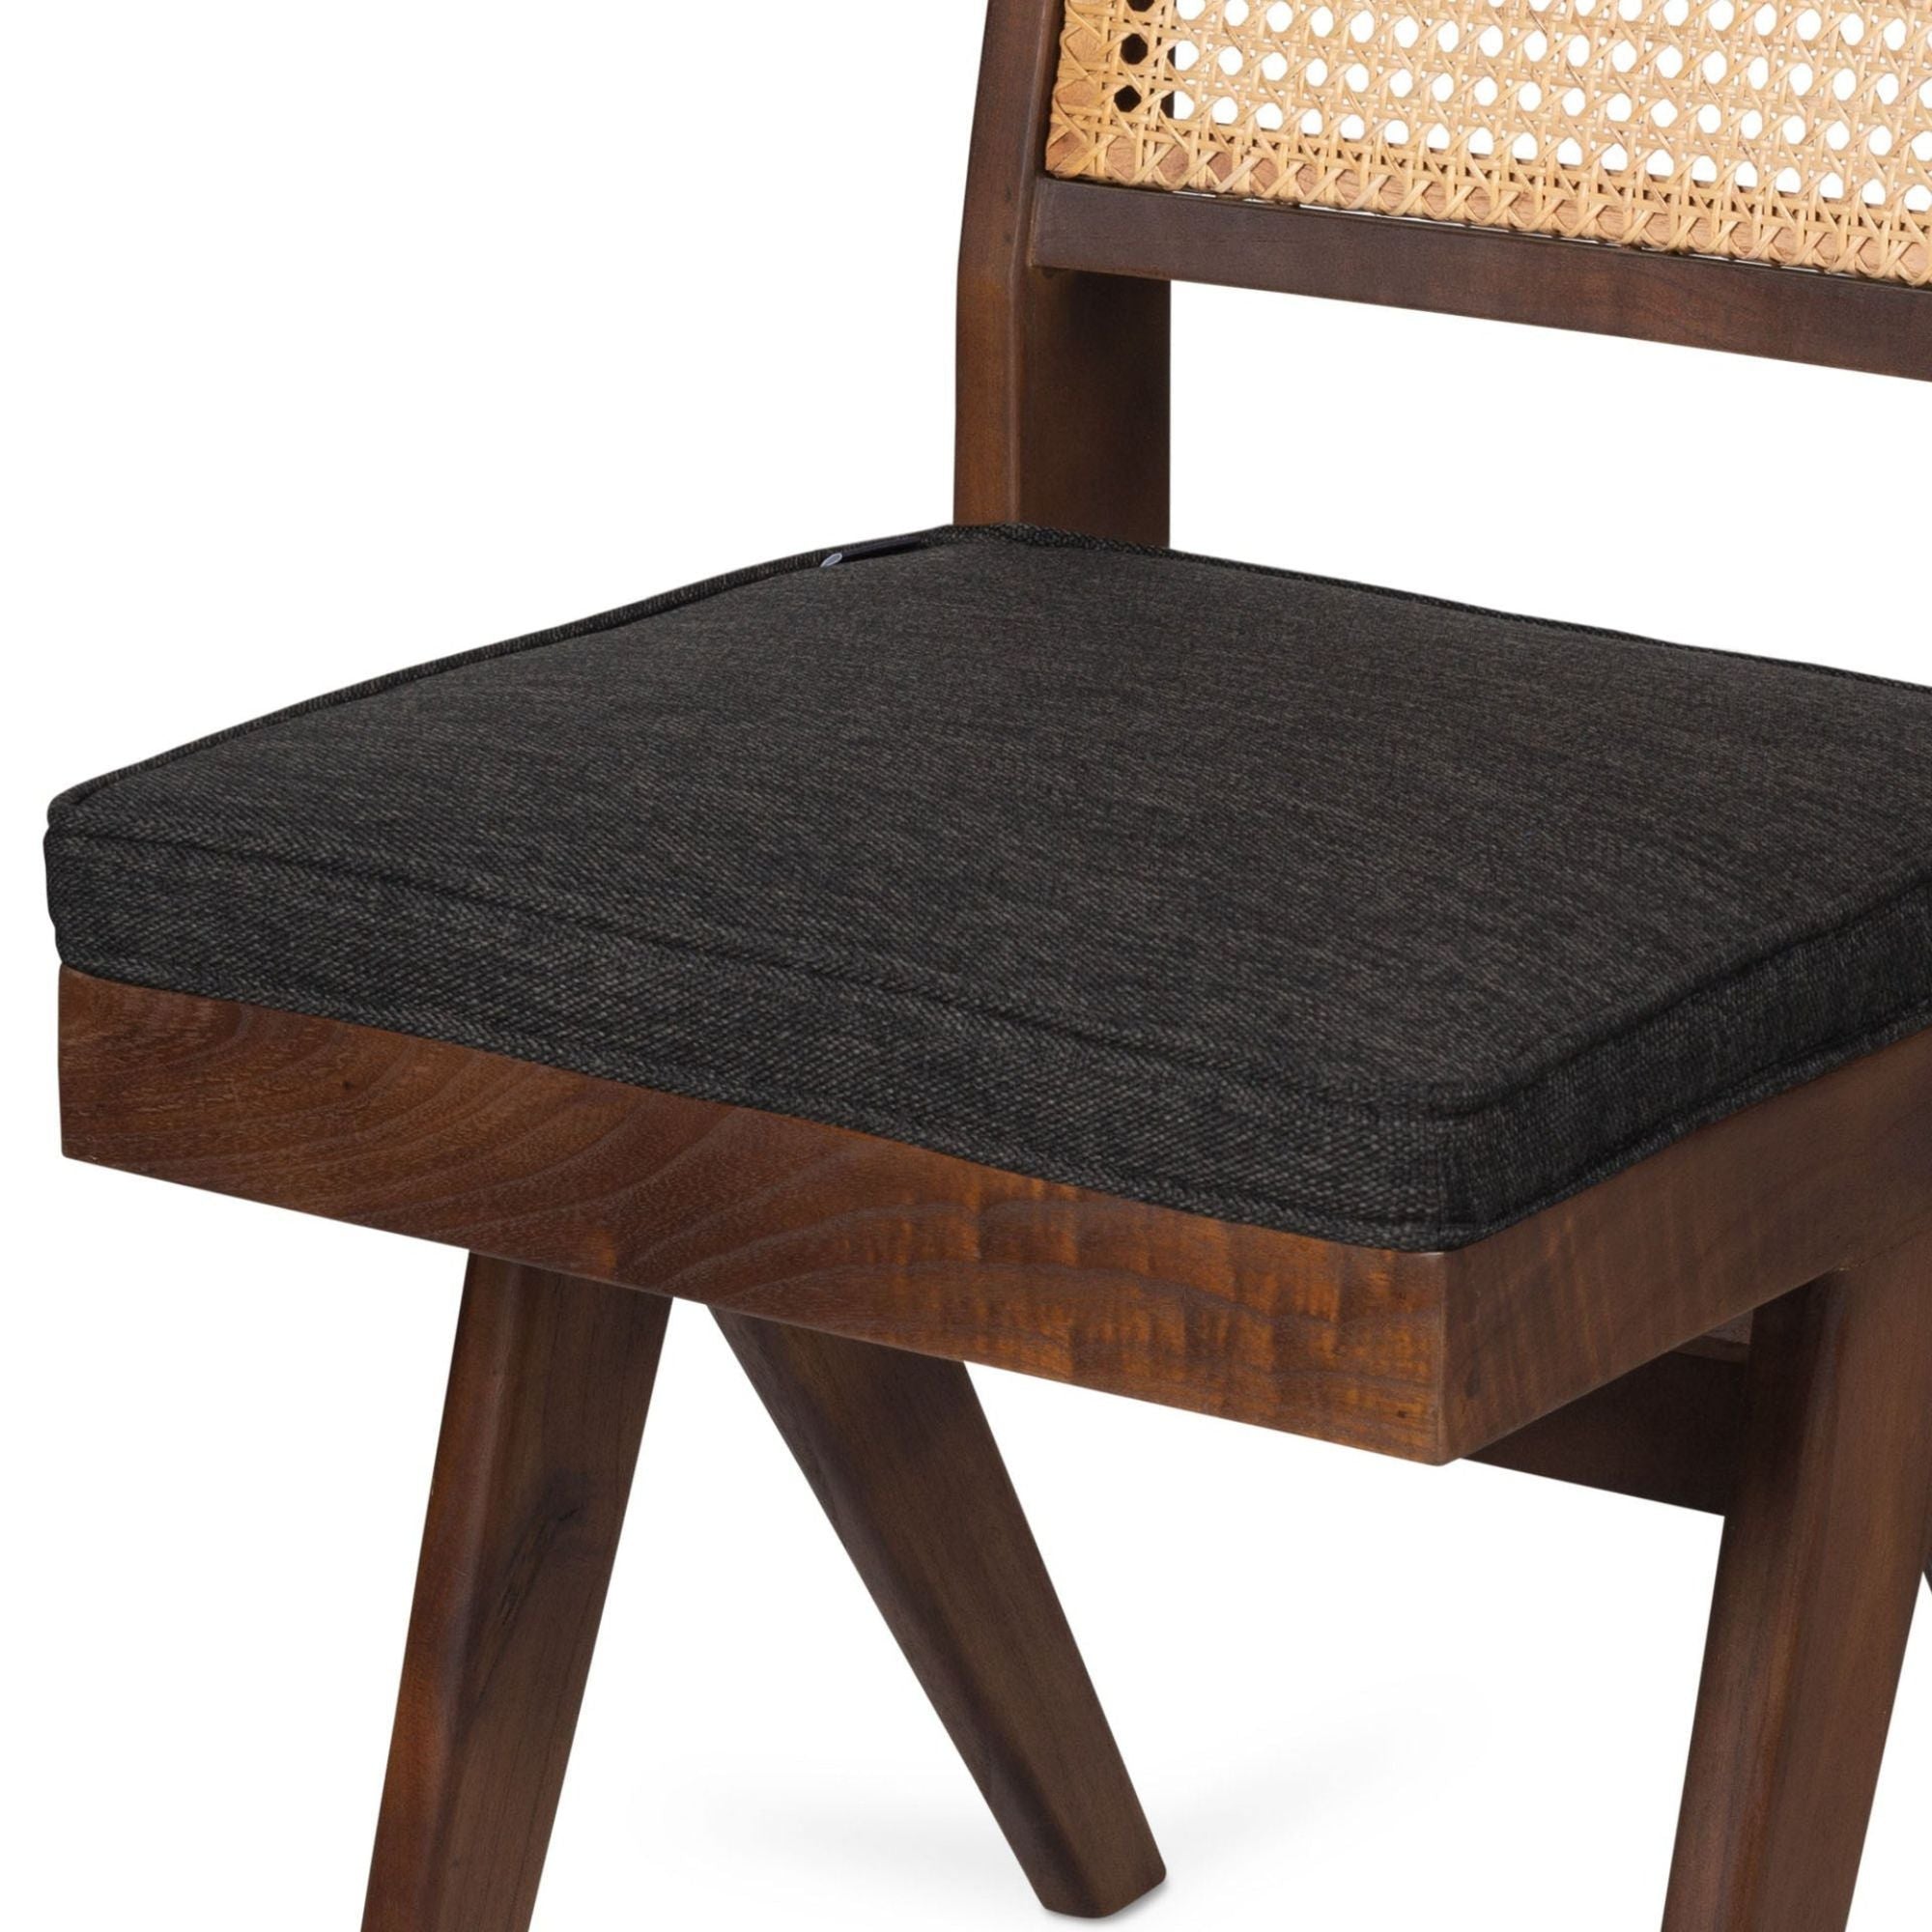 Cushion for Dining Chair - THAT COOL LIVING